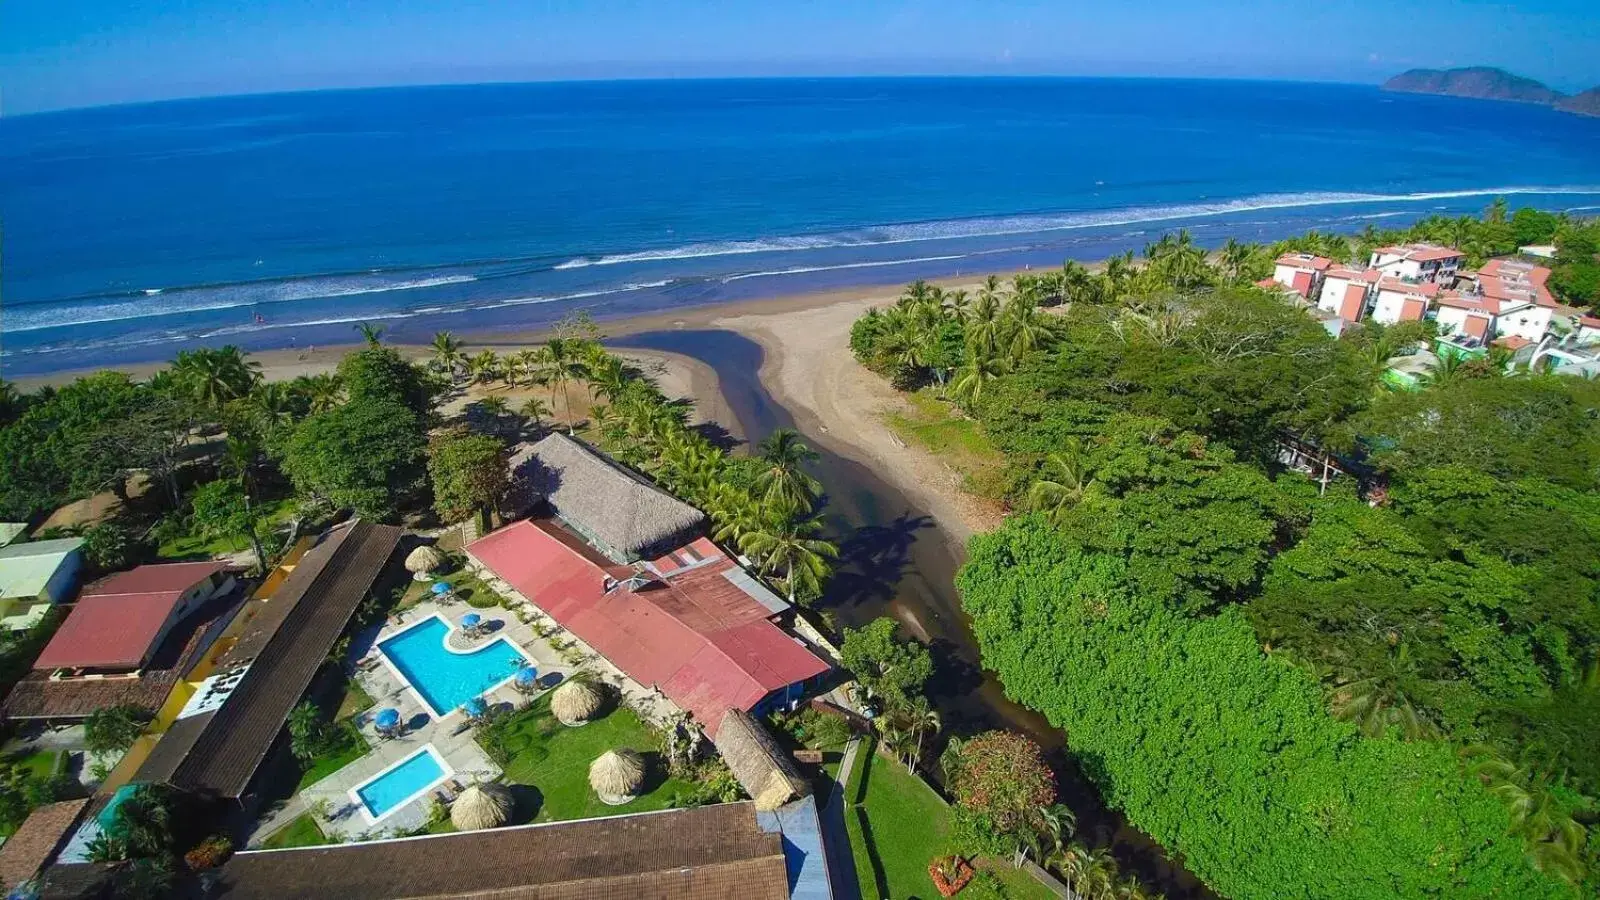 Property building, Bird's-eye View in Costa Rica Surf Camp by SUPERbrand